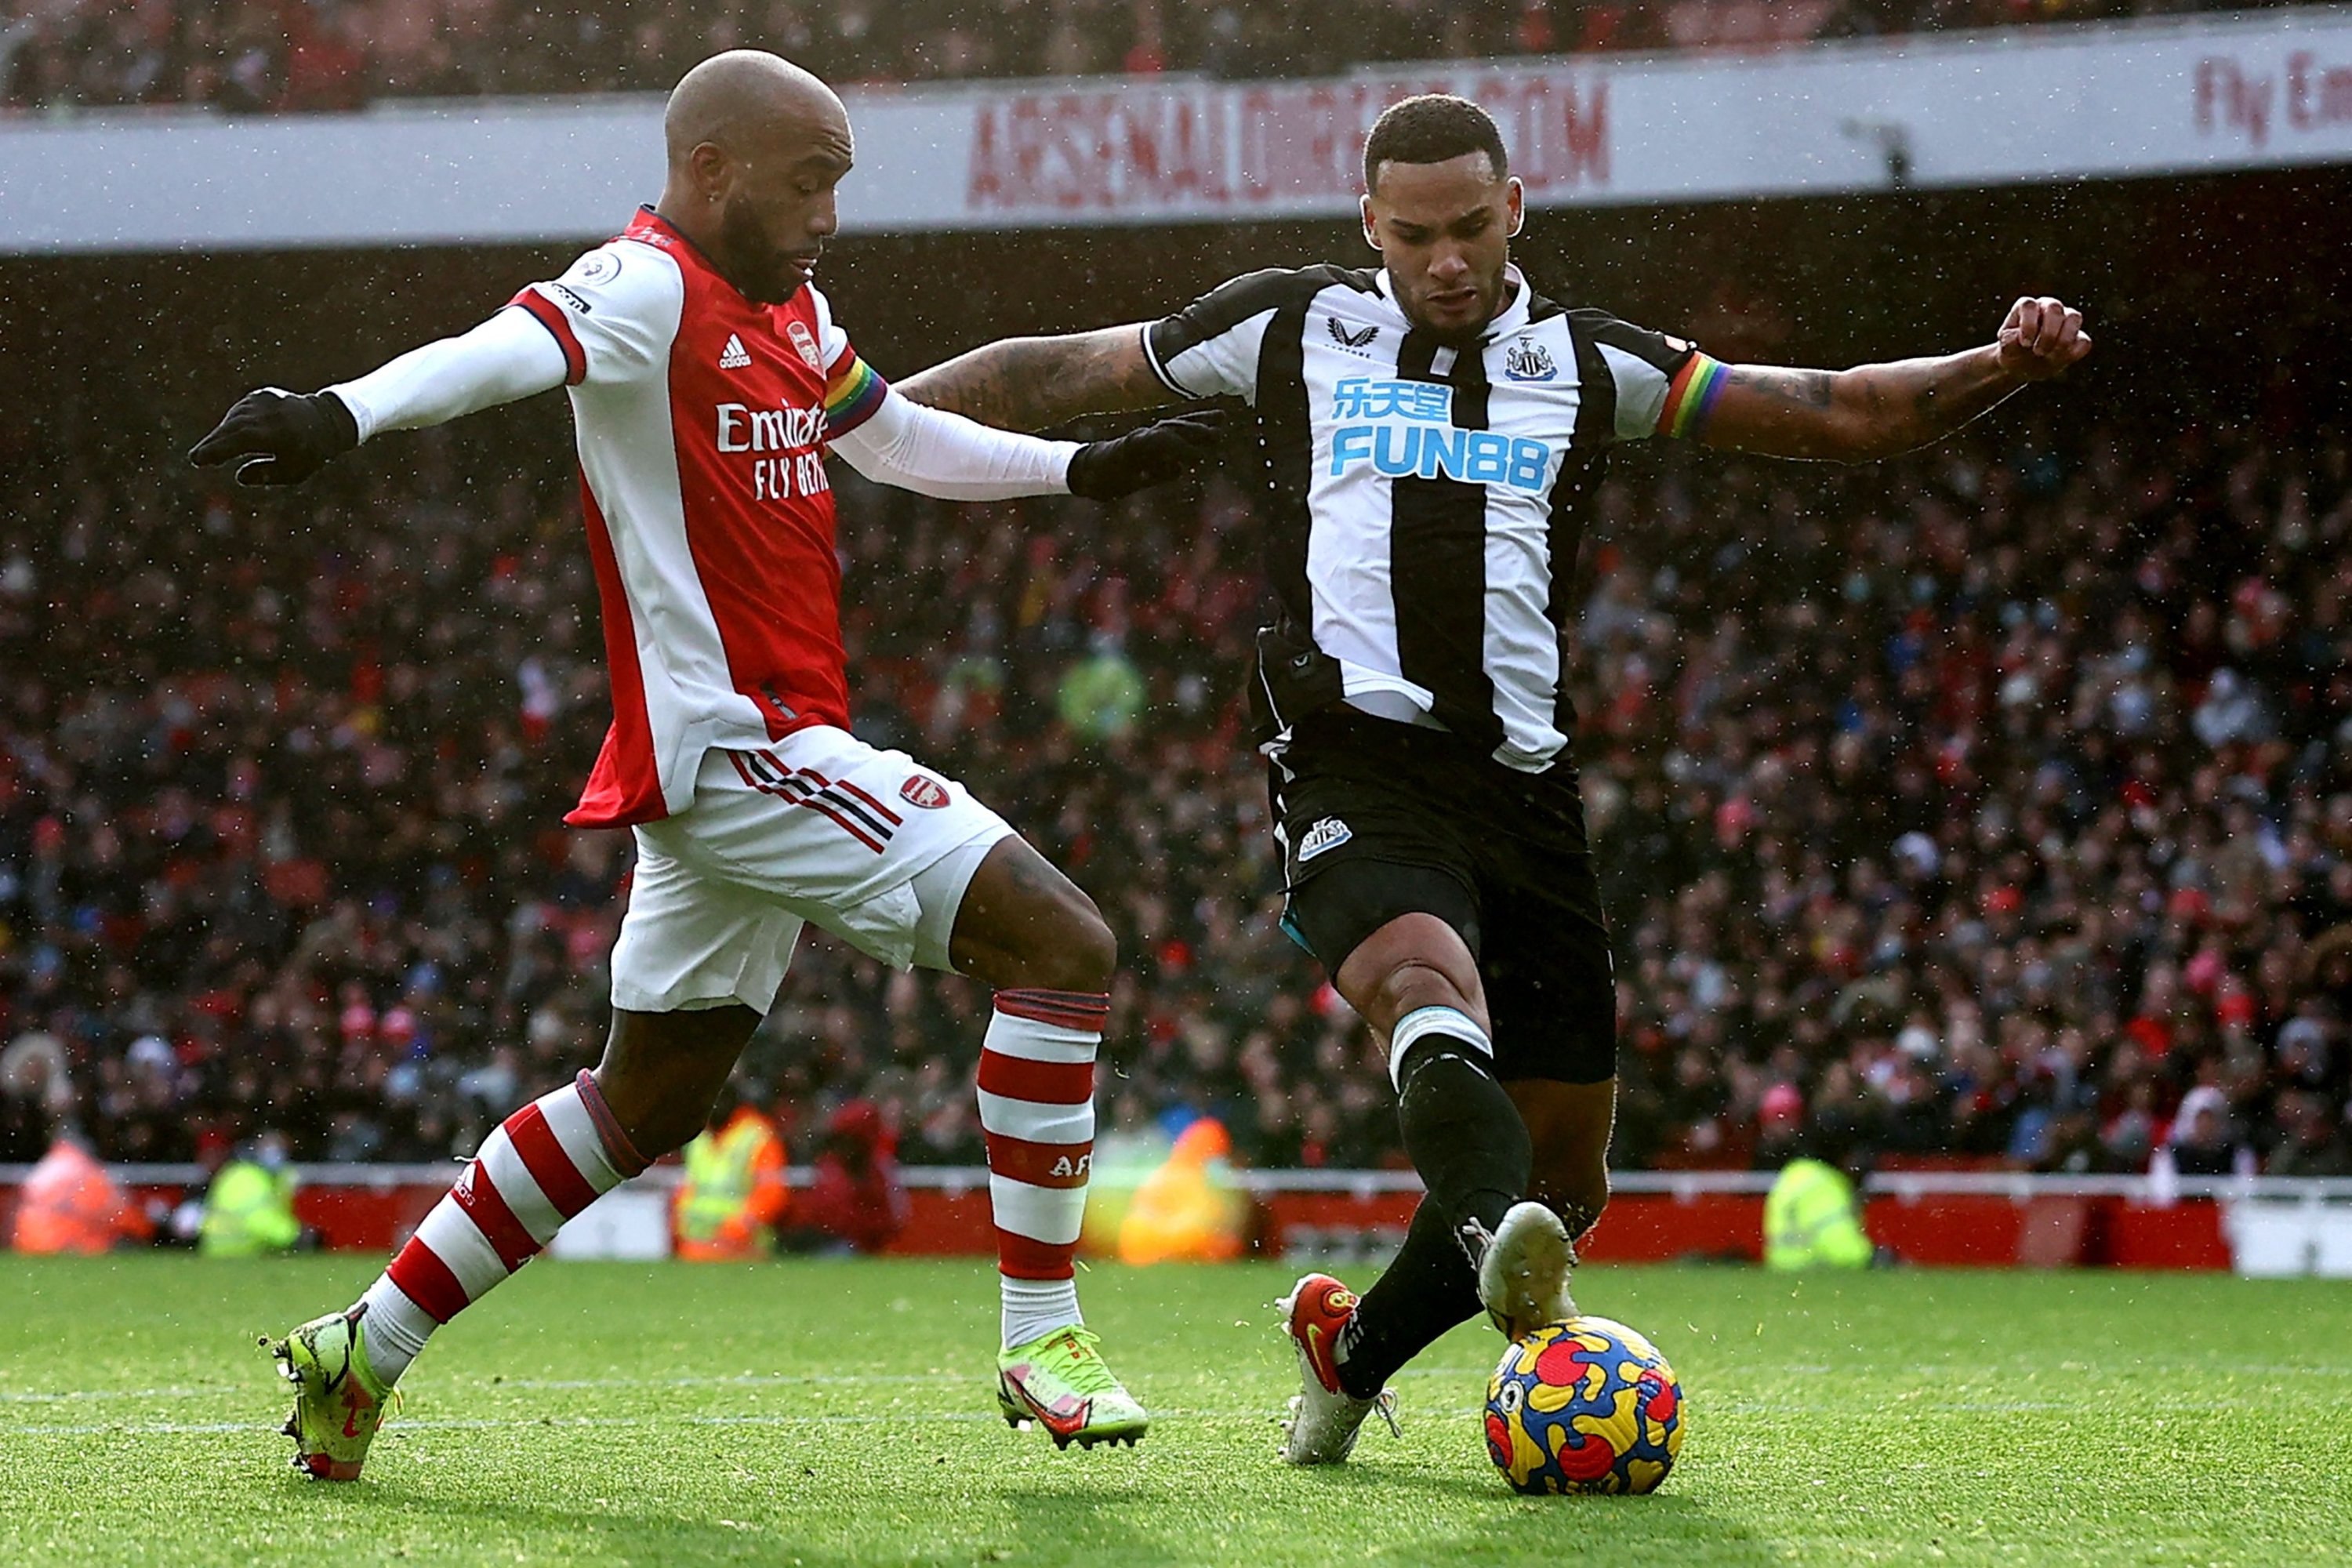 Newcastle United's Jamaal Lascelles (R) vies with Arsenal's Alexandre Lacazette in a Premier League match at the Emirates Stadium, London, England, Nov. 27, 2021. (AFP Photo)